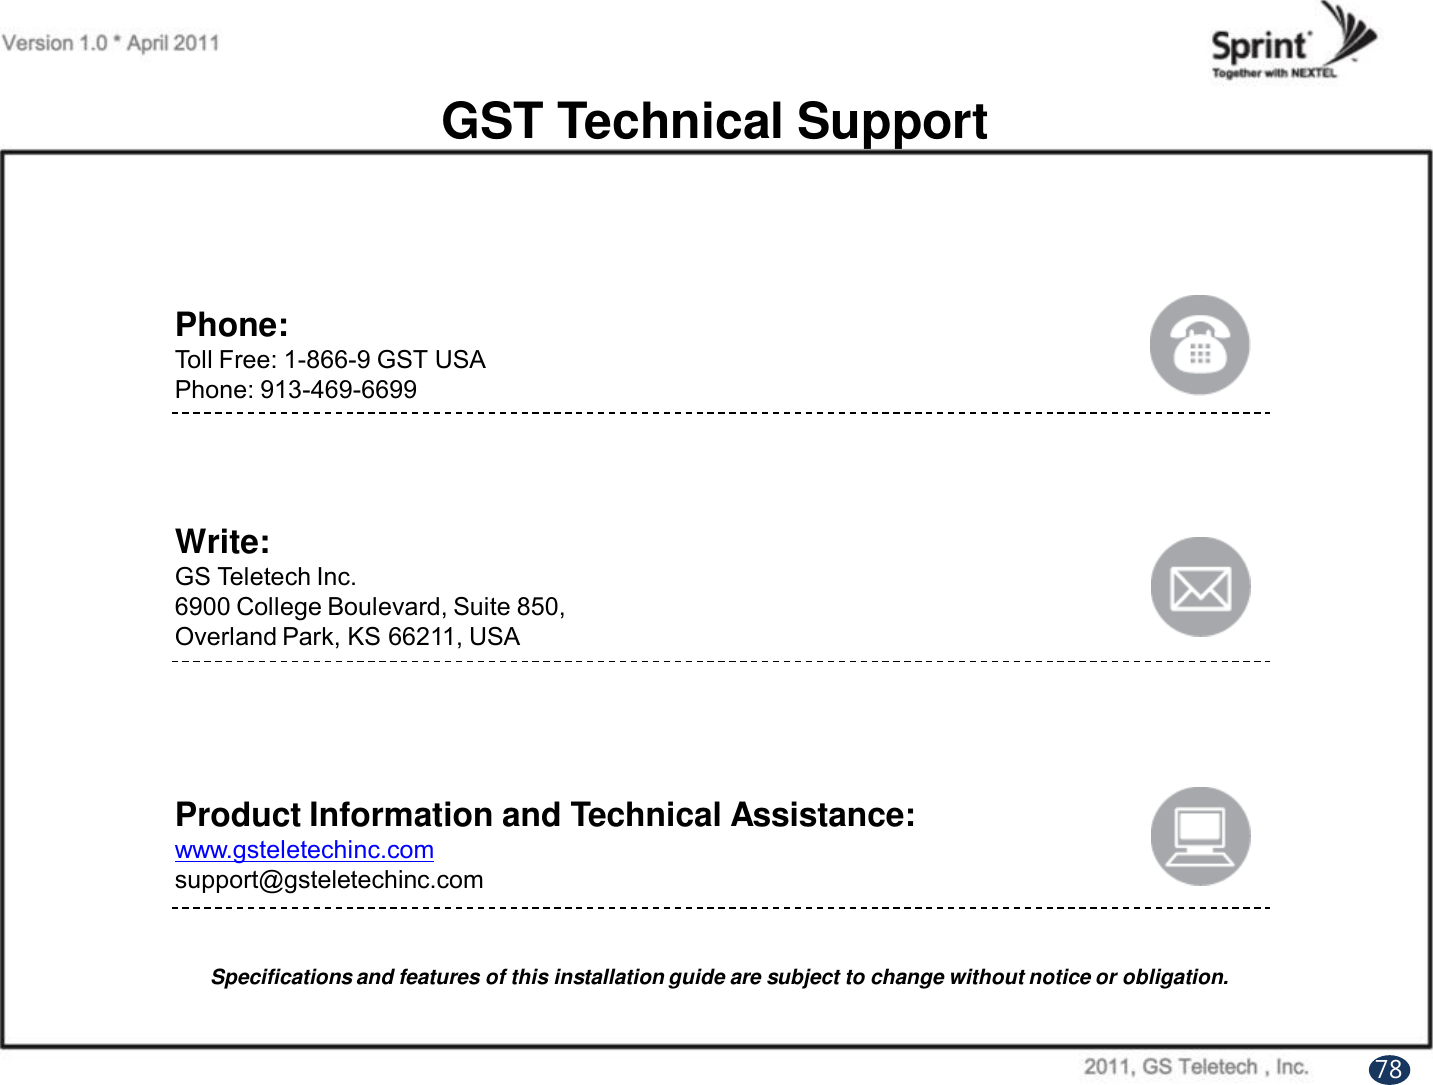 GST Technical SupportPhone:Toll Free: 1-866-9 GST USAPhone: 913-469-6699Write:GS Teletech Inc.6900 College Boulevard, Suite 850, Overland Park, KS 66211, USAProduct Information and Technical Assistance:www.gsteletechinc.comsupport@gsteletechinc.comSpecifications and features of this installation guide are subject to change without notice or obligation.78